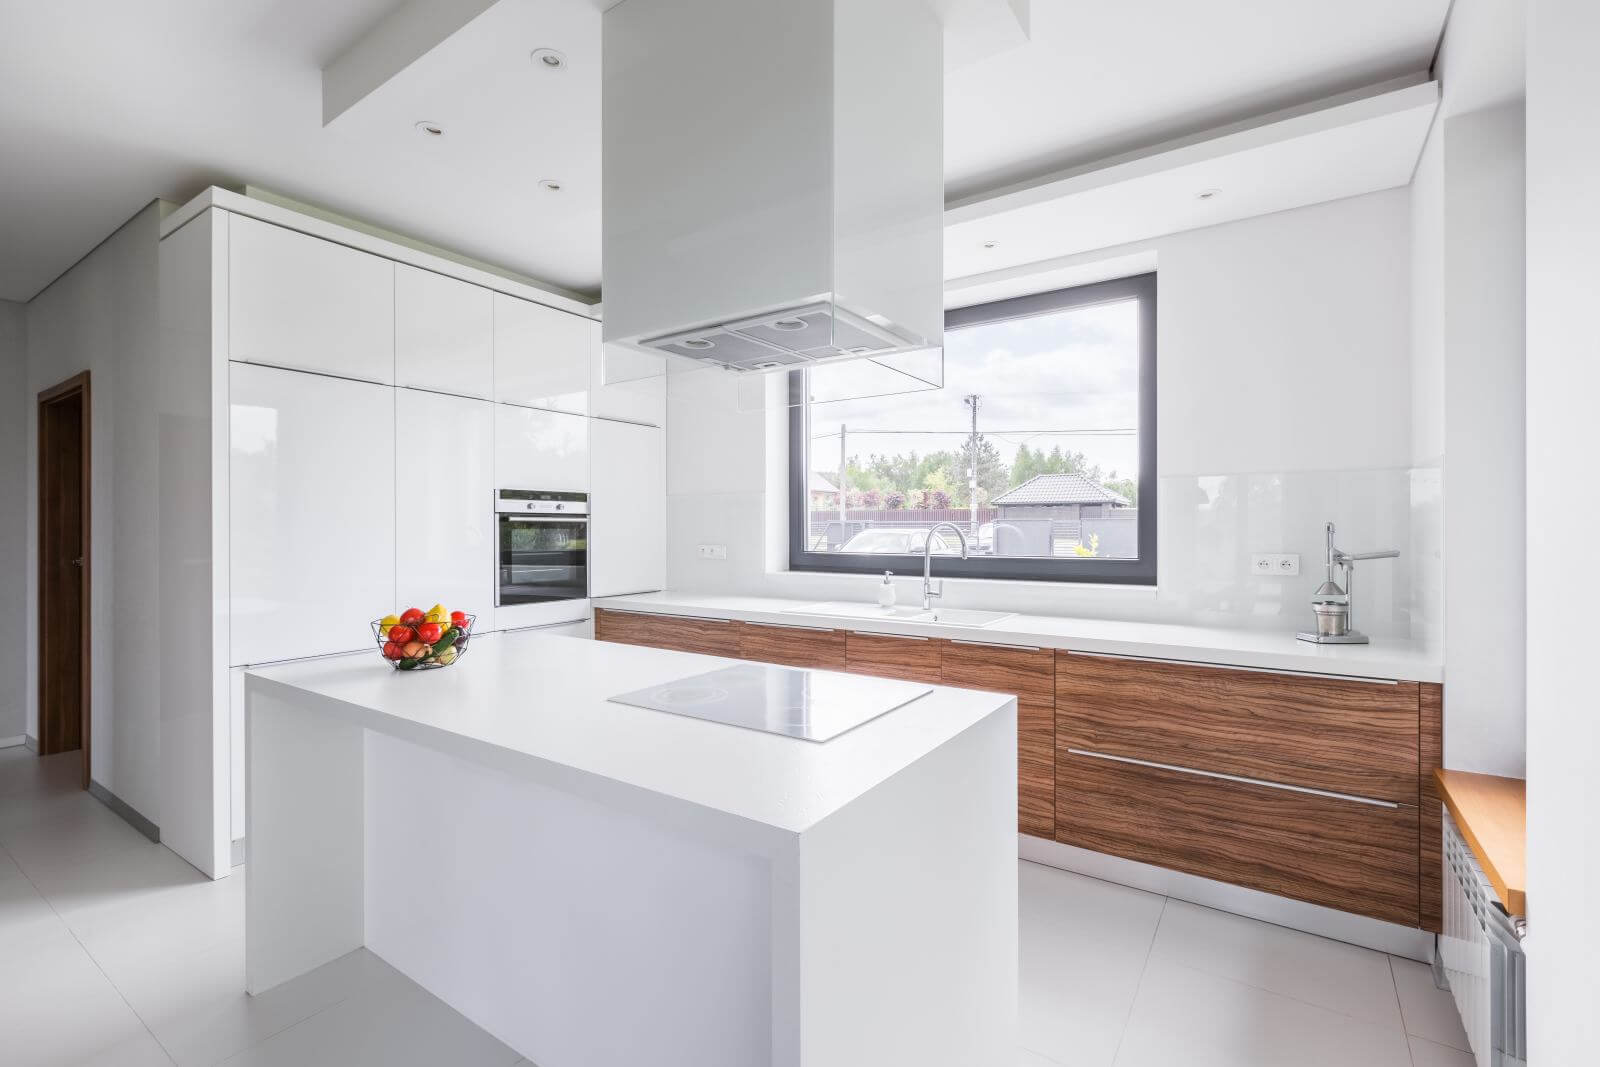 Modern, white kitchen with island and long countertop